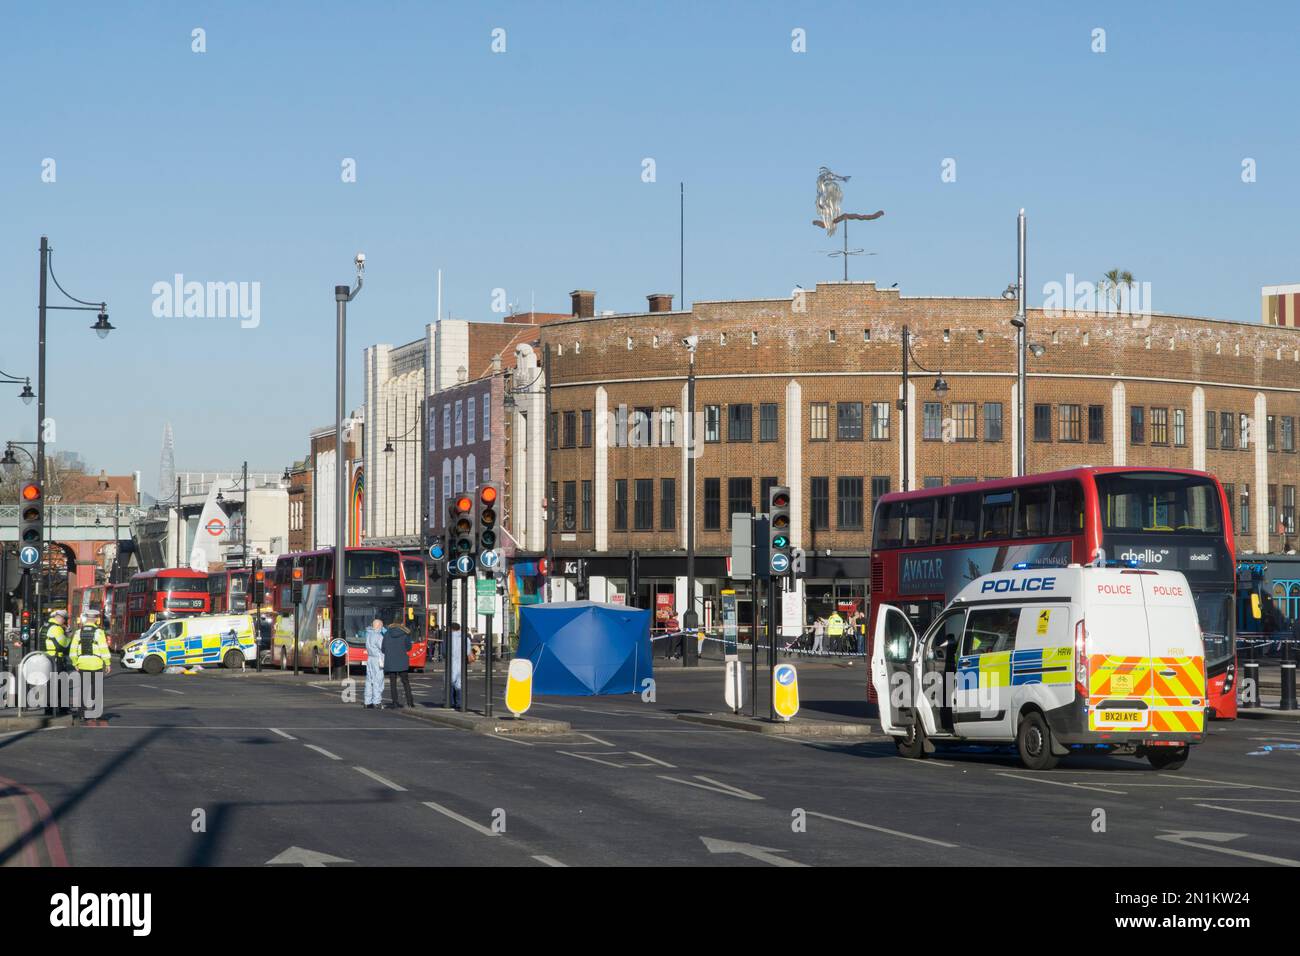 London, UK, 6 February 2022: Brixton centre is closed to traffic after a pedestrian fatality at the junction of Brixton Hill and Coldharbour Lane. An HGV lorry hit the man and did not stop but was later apprehended by police. Many bus routes are disrupted and a quiet, solemn air pervades the normally bustling Brixton Road. Police locally said the road closures were unlikely to be cleared before 6pm. Anna Watson/Alamy Live News Stock Photo